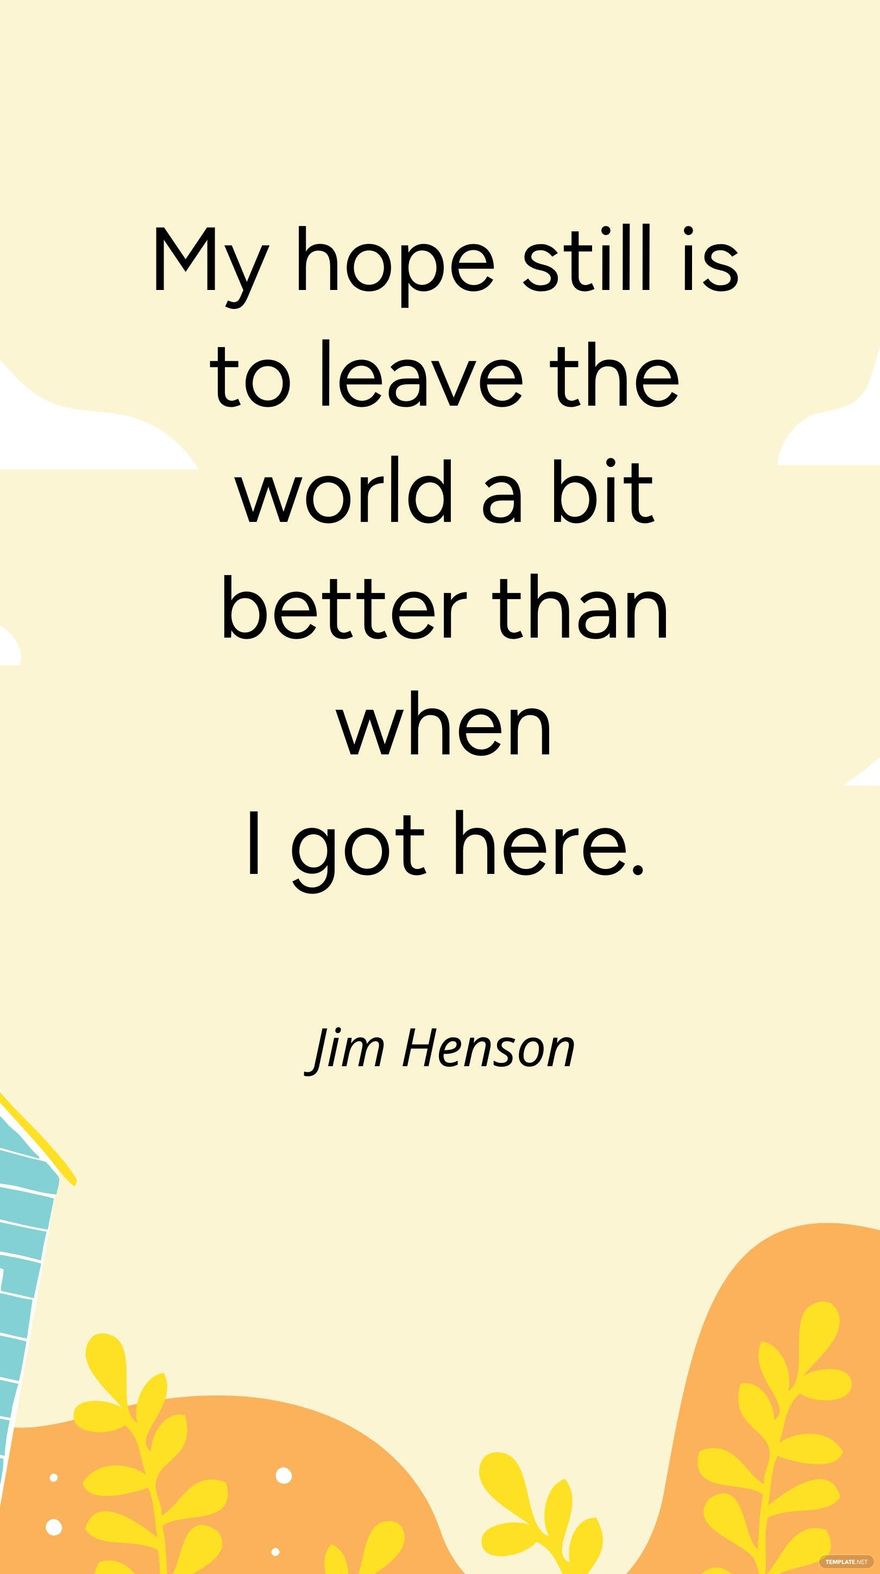 Jim Henson - My hope still is to leave the world a bit better than when I got here. in JPG